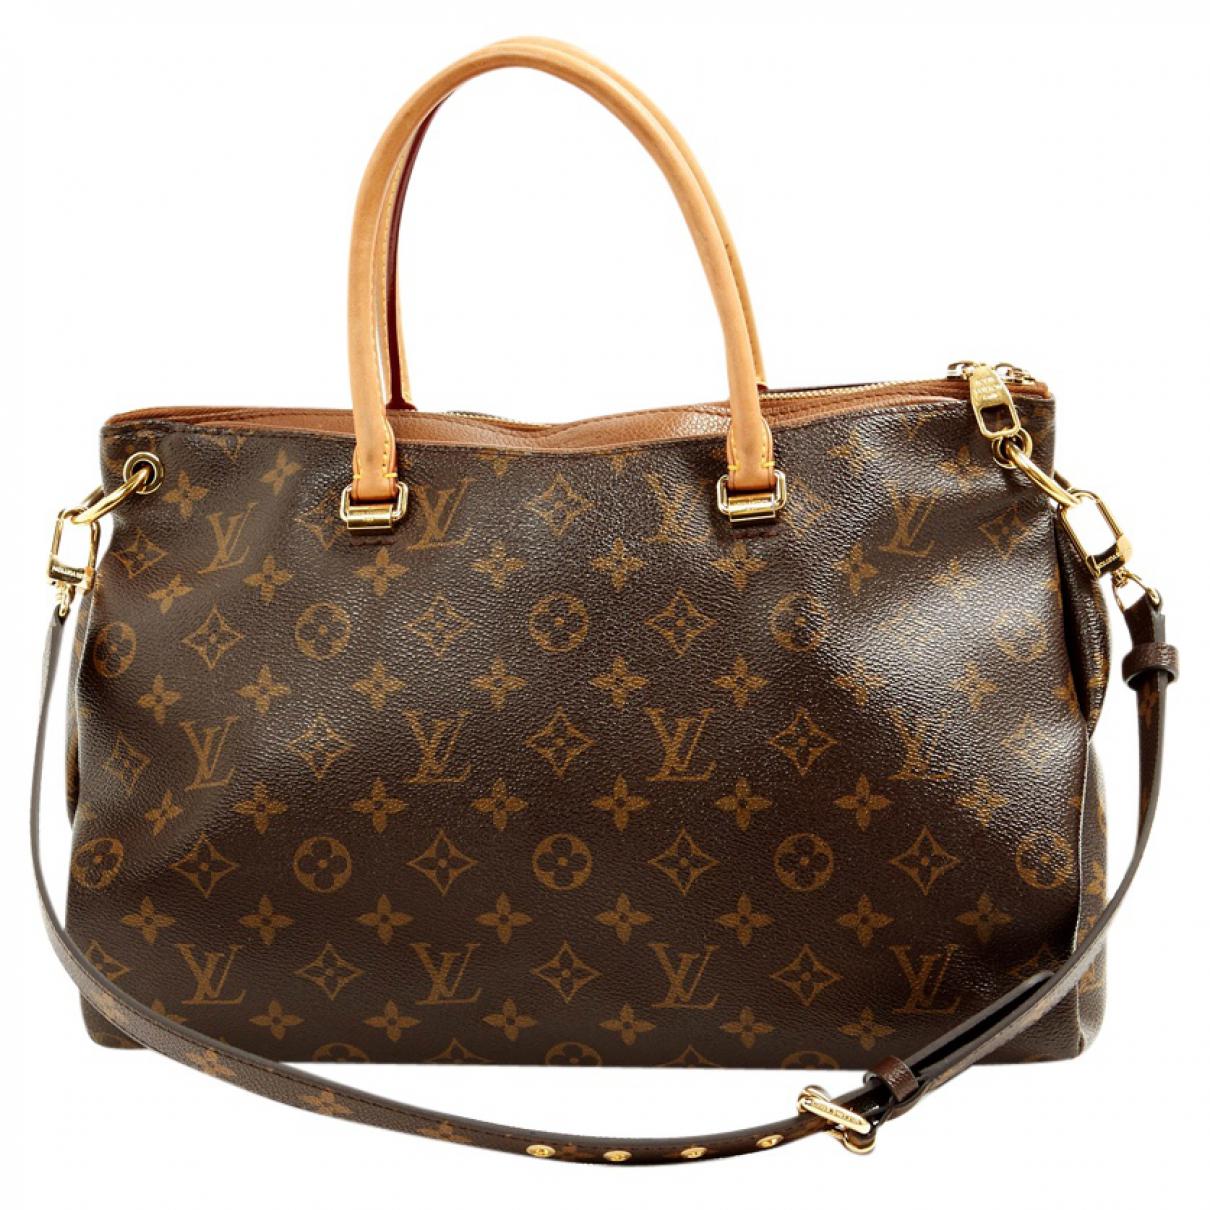 Lyst - Louis Vuitton Pre-owned Pallas Leather Handbag in Brown